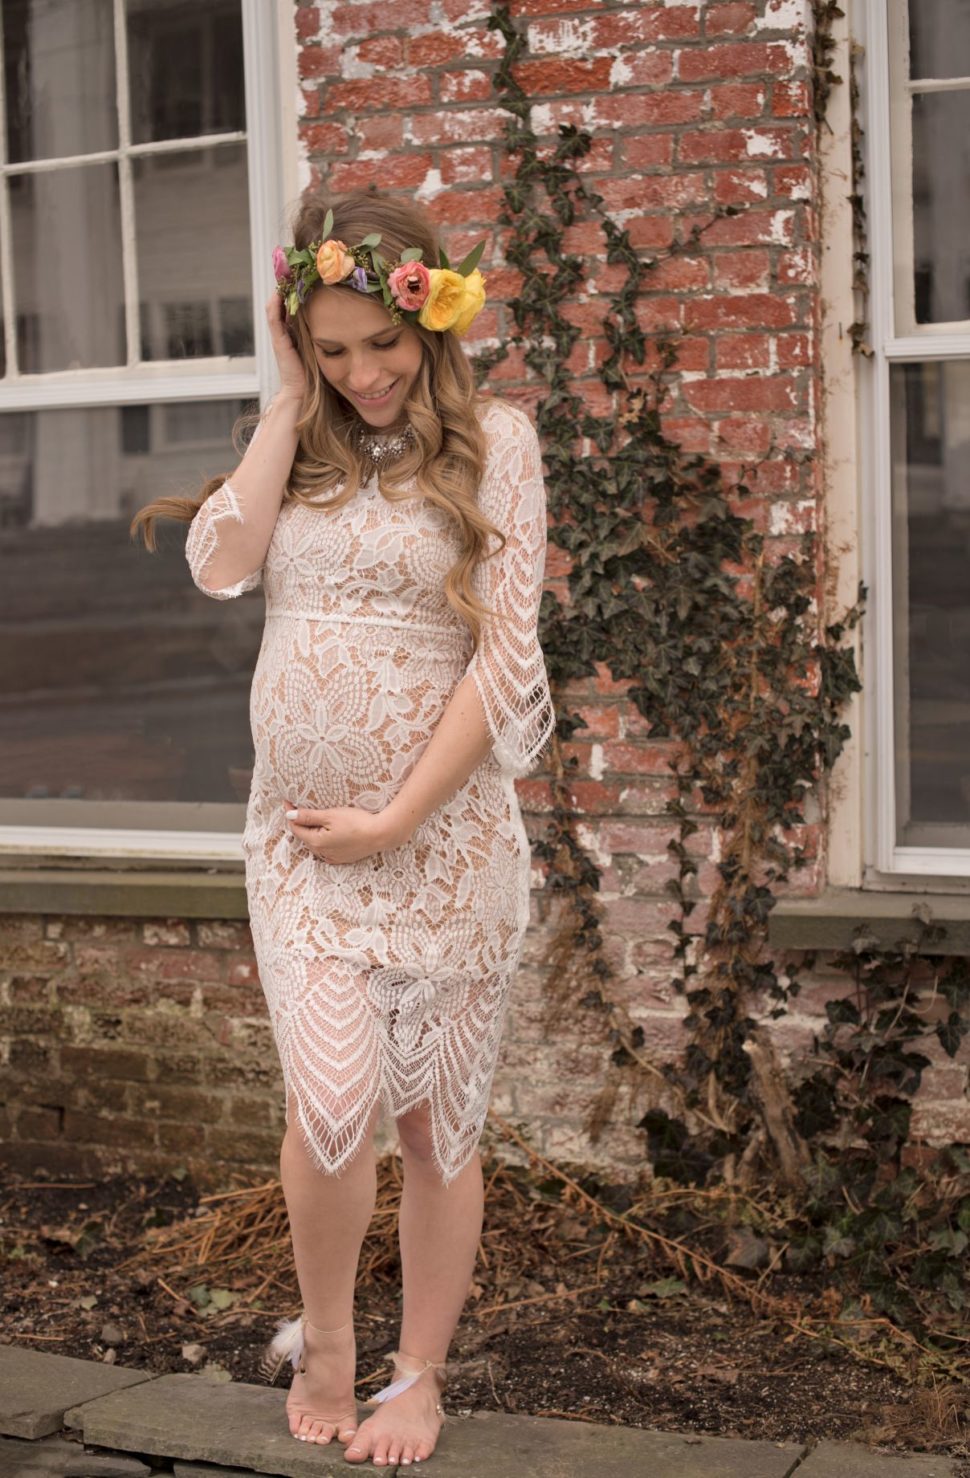 Medium Size of Baby Shower:what To Wear To A Baby Shower In October Mom And Dad Baby Shower Outfits Petite Maternity Dresses For Baby Shower Maternity Blouses For Baby Shower Baby Shower Dresses Cute Inexpensive Maternity Clothes Maternity Evening Gowns Plus Size Maternity Dresses For Baby Shower